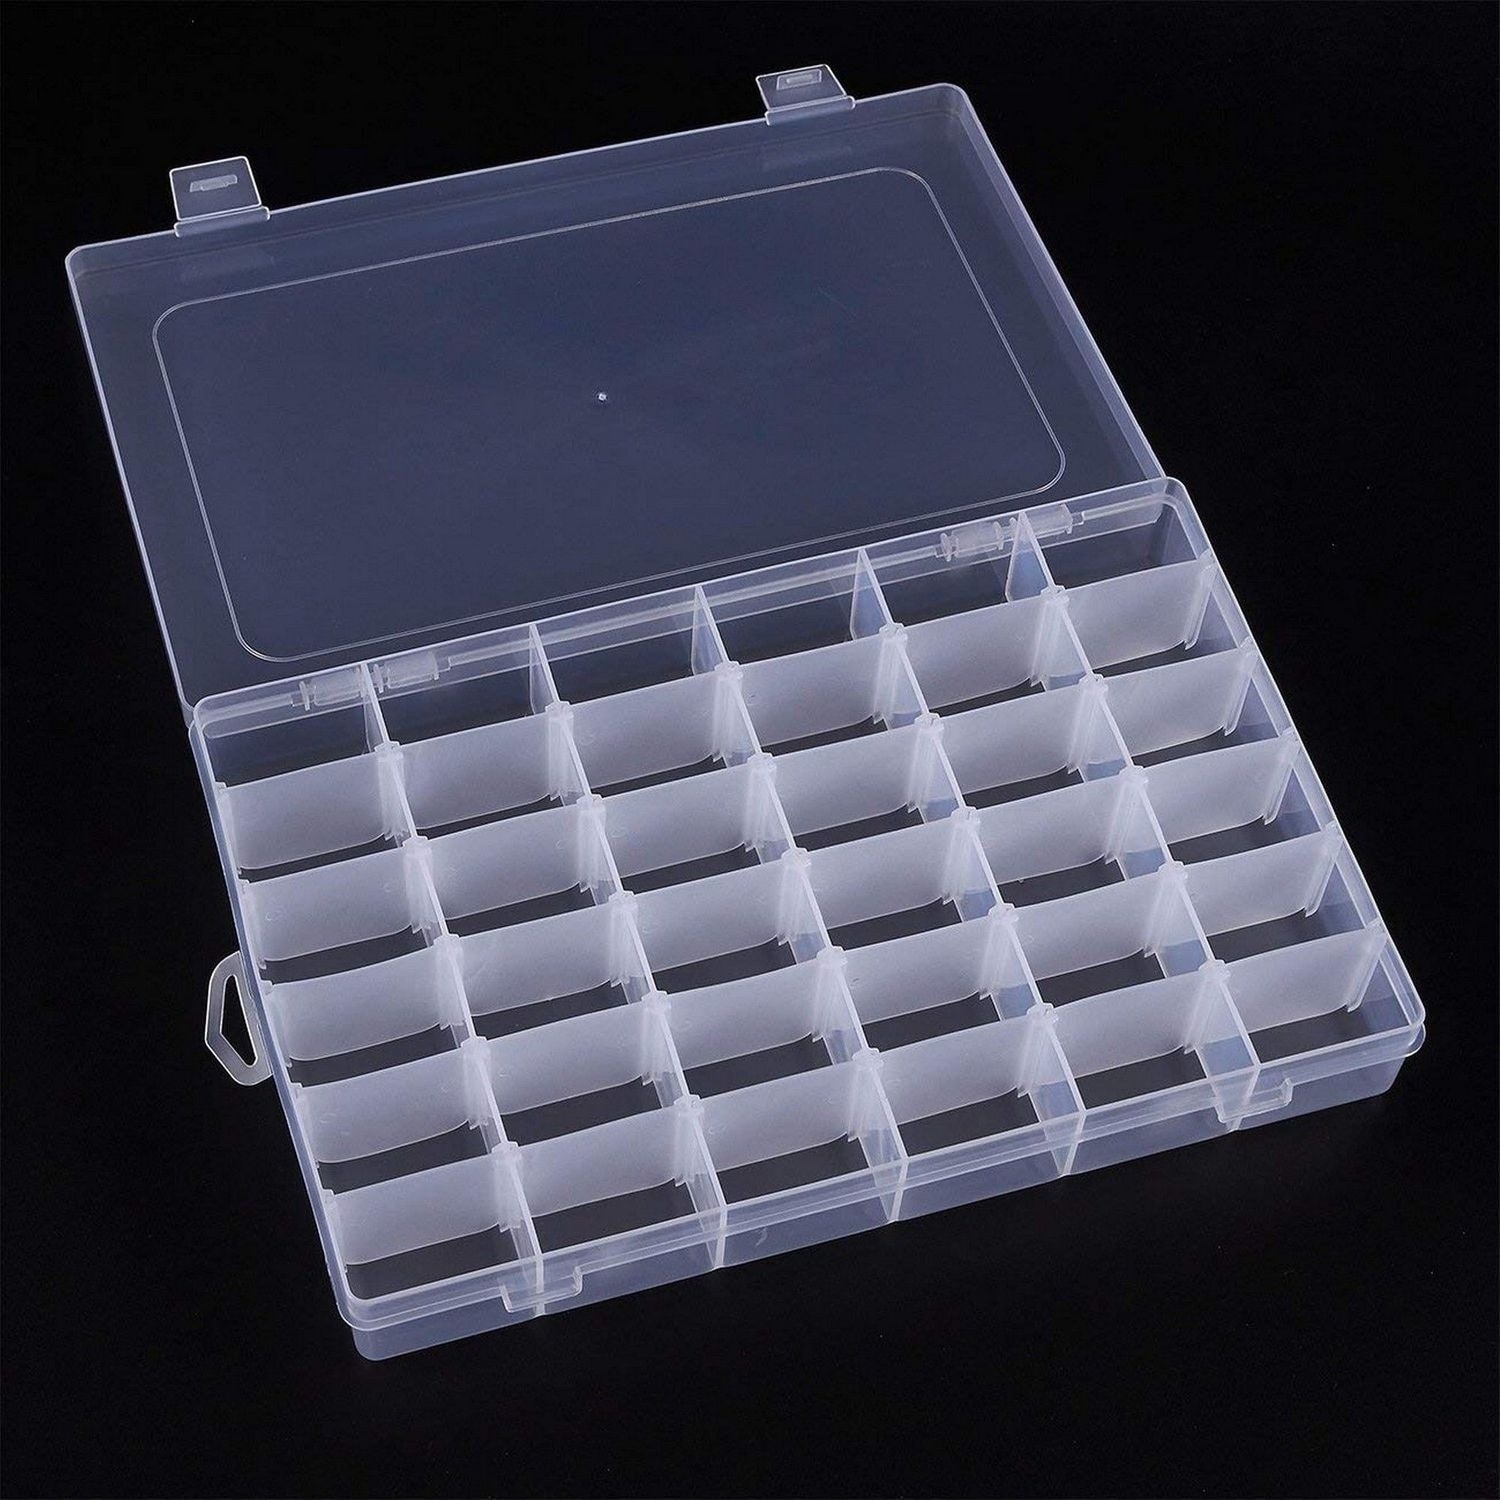 36 Slots Adjustable Jewelry Rings Storage Box Plastic Container Organizer -  Clear - Bed Bath & Beyond - 17596440